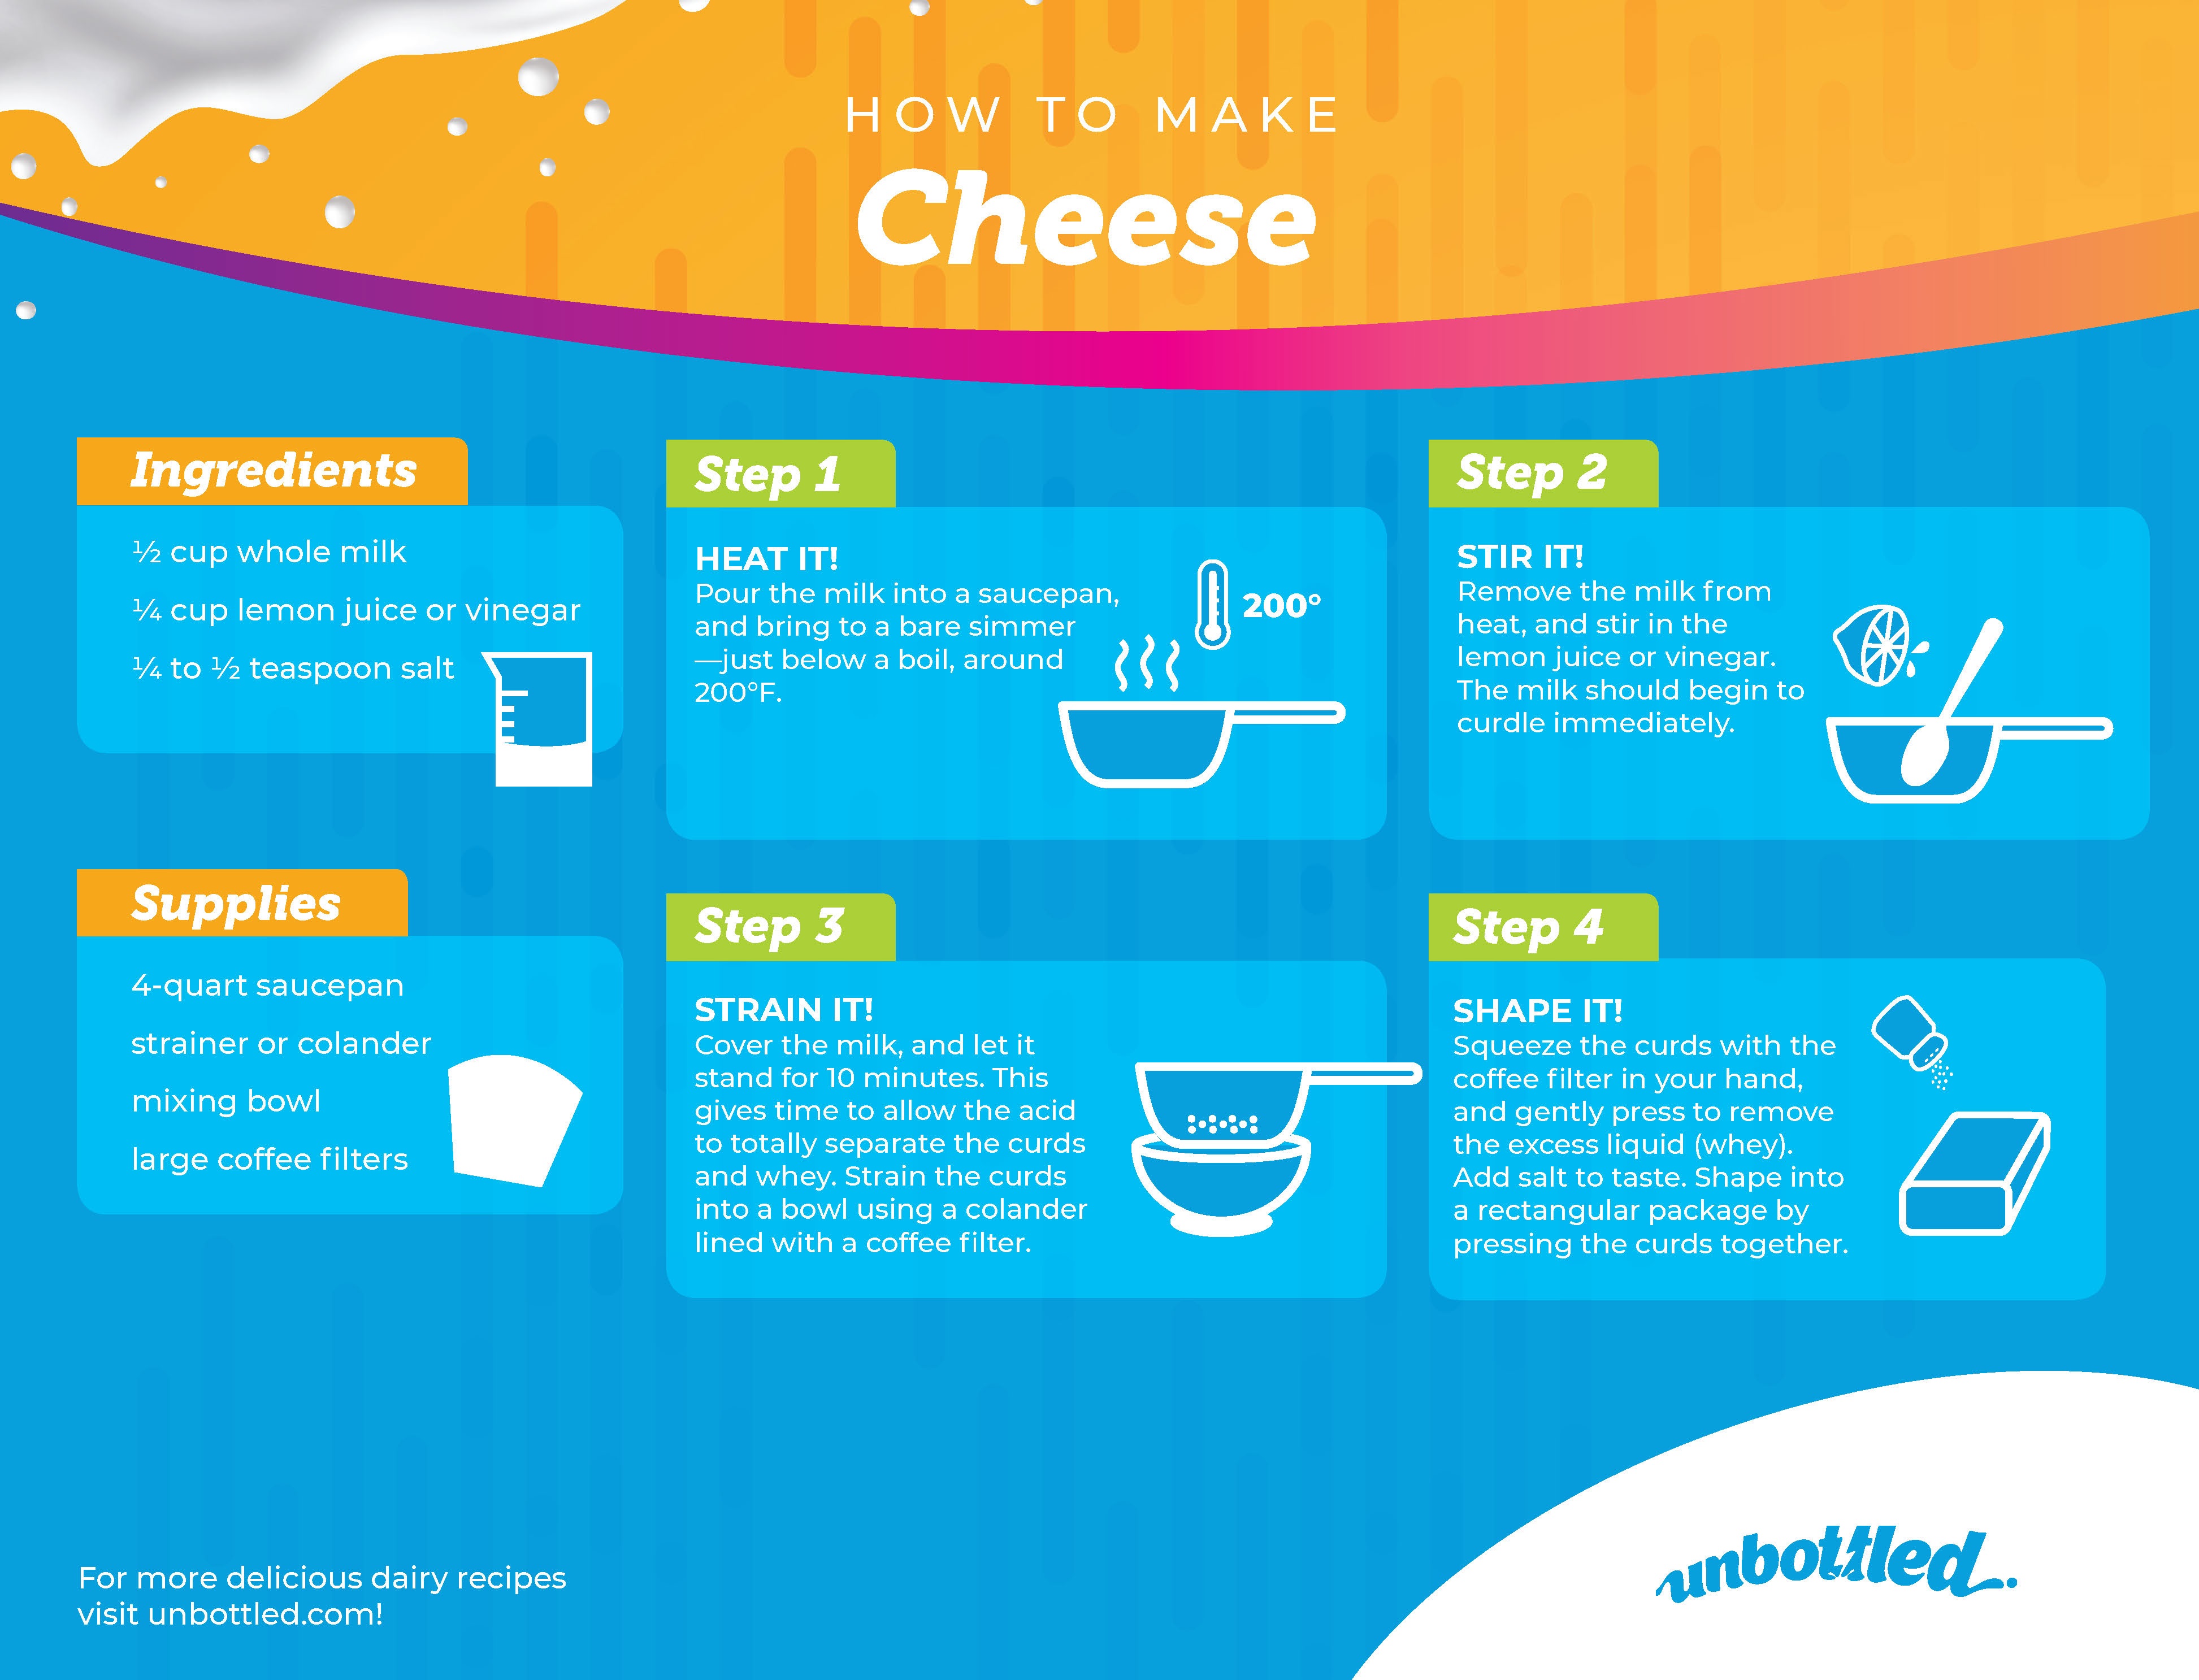 20200715 How to Make Cheese Infographic 11x8 5